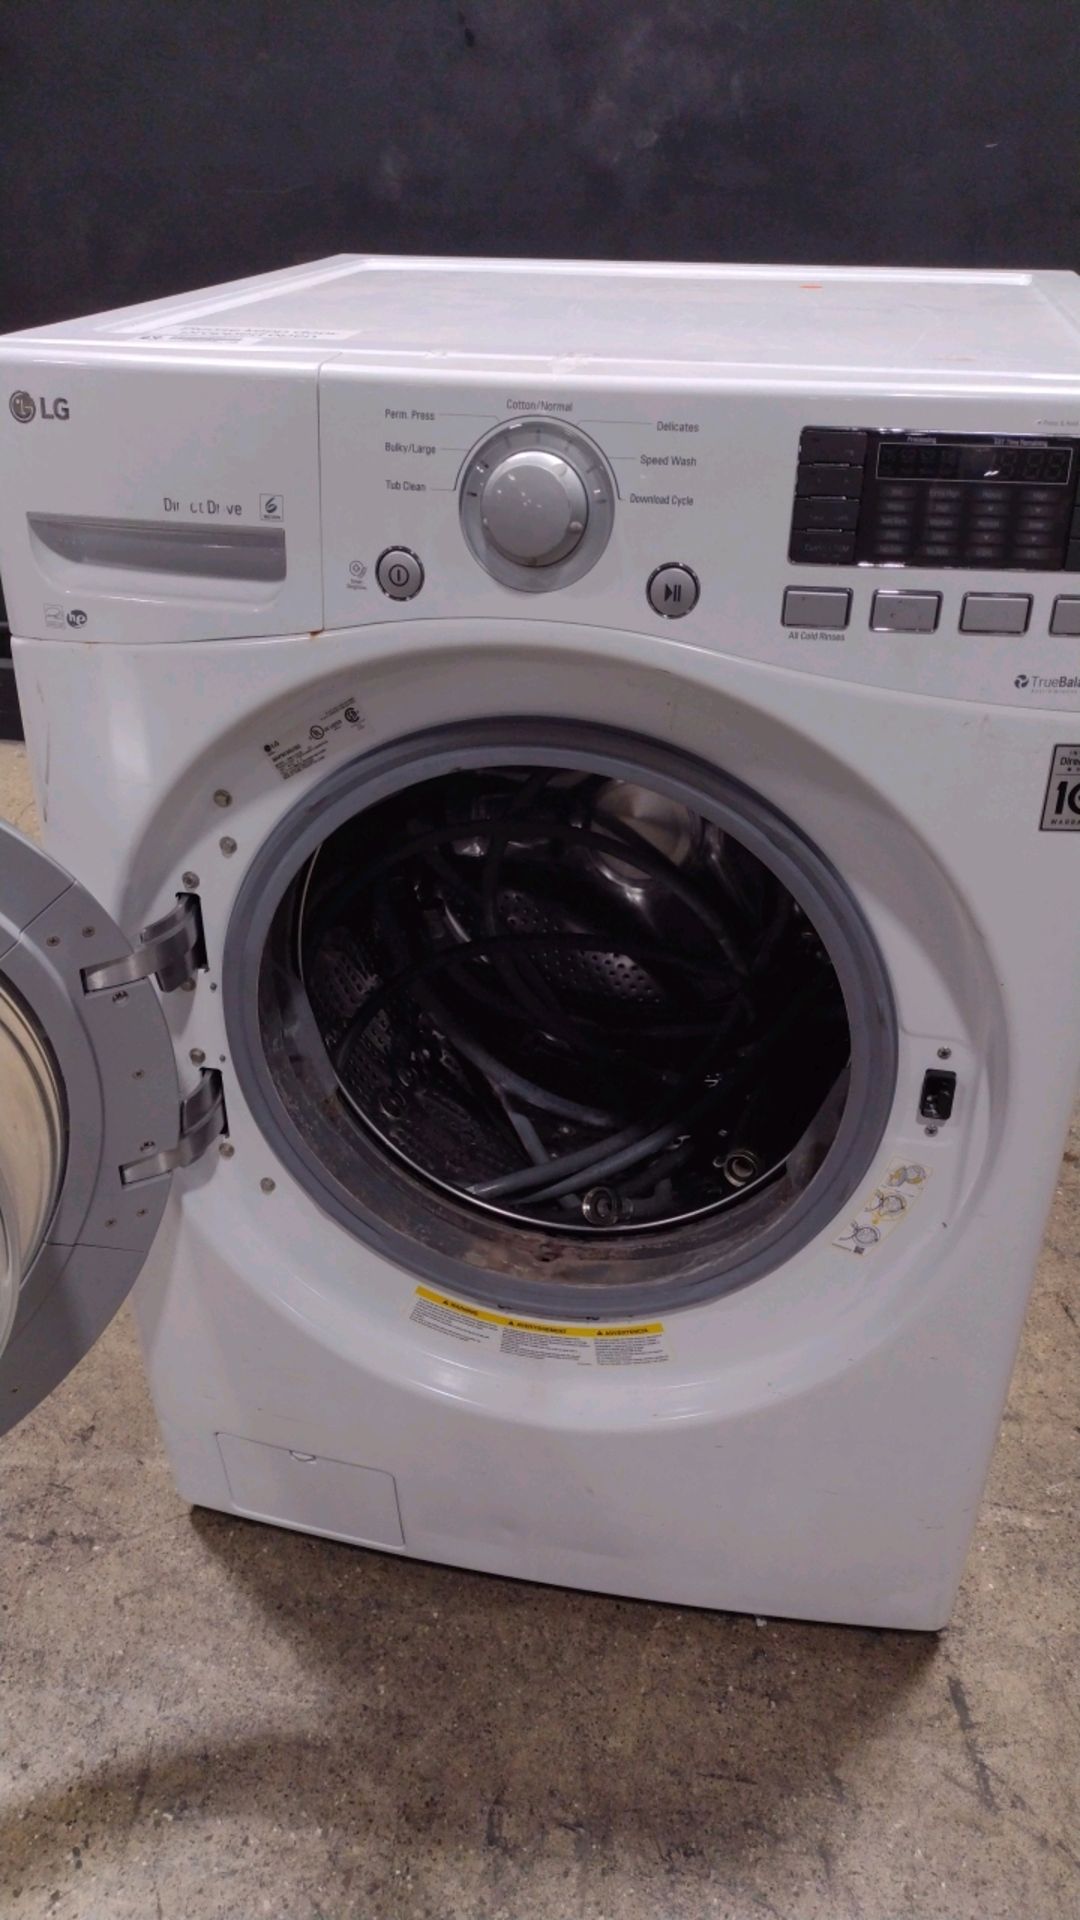 LG WM3170CW WASHER MACHINE (LOCATED AT 3325 MOUNT PROSPECT ROAD, FRANKLIN PARK, IL, 60131) - Image 2 of 3